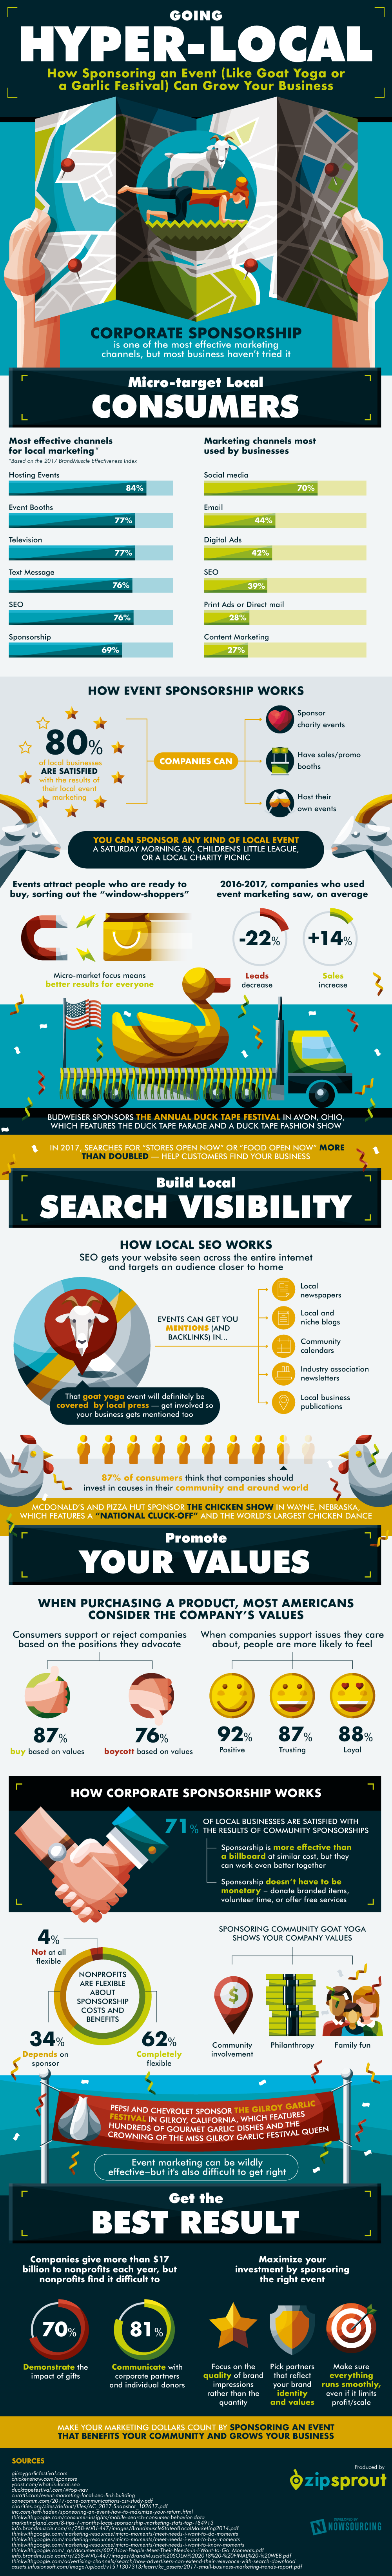 How Sponsoring Local Events Can Boost Your Business [Infographic]